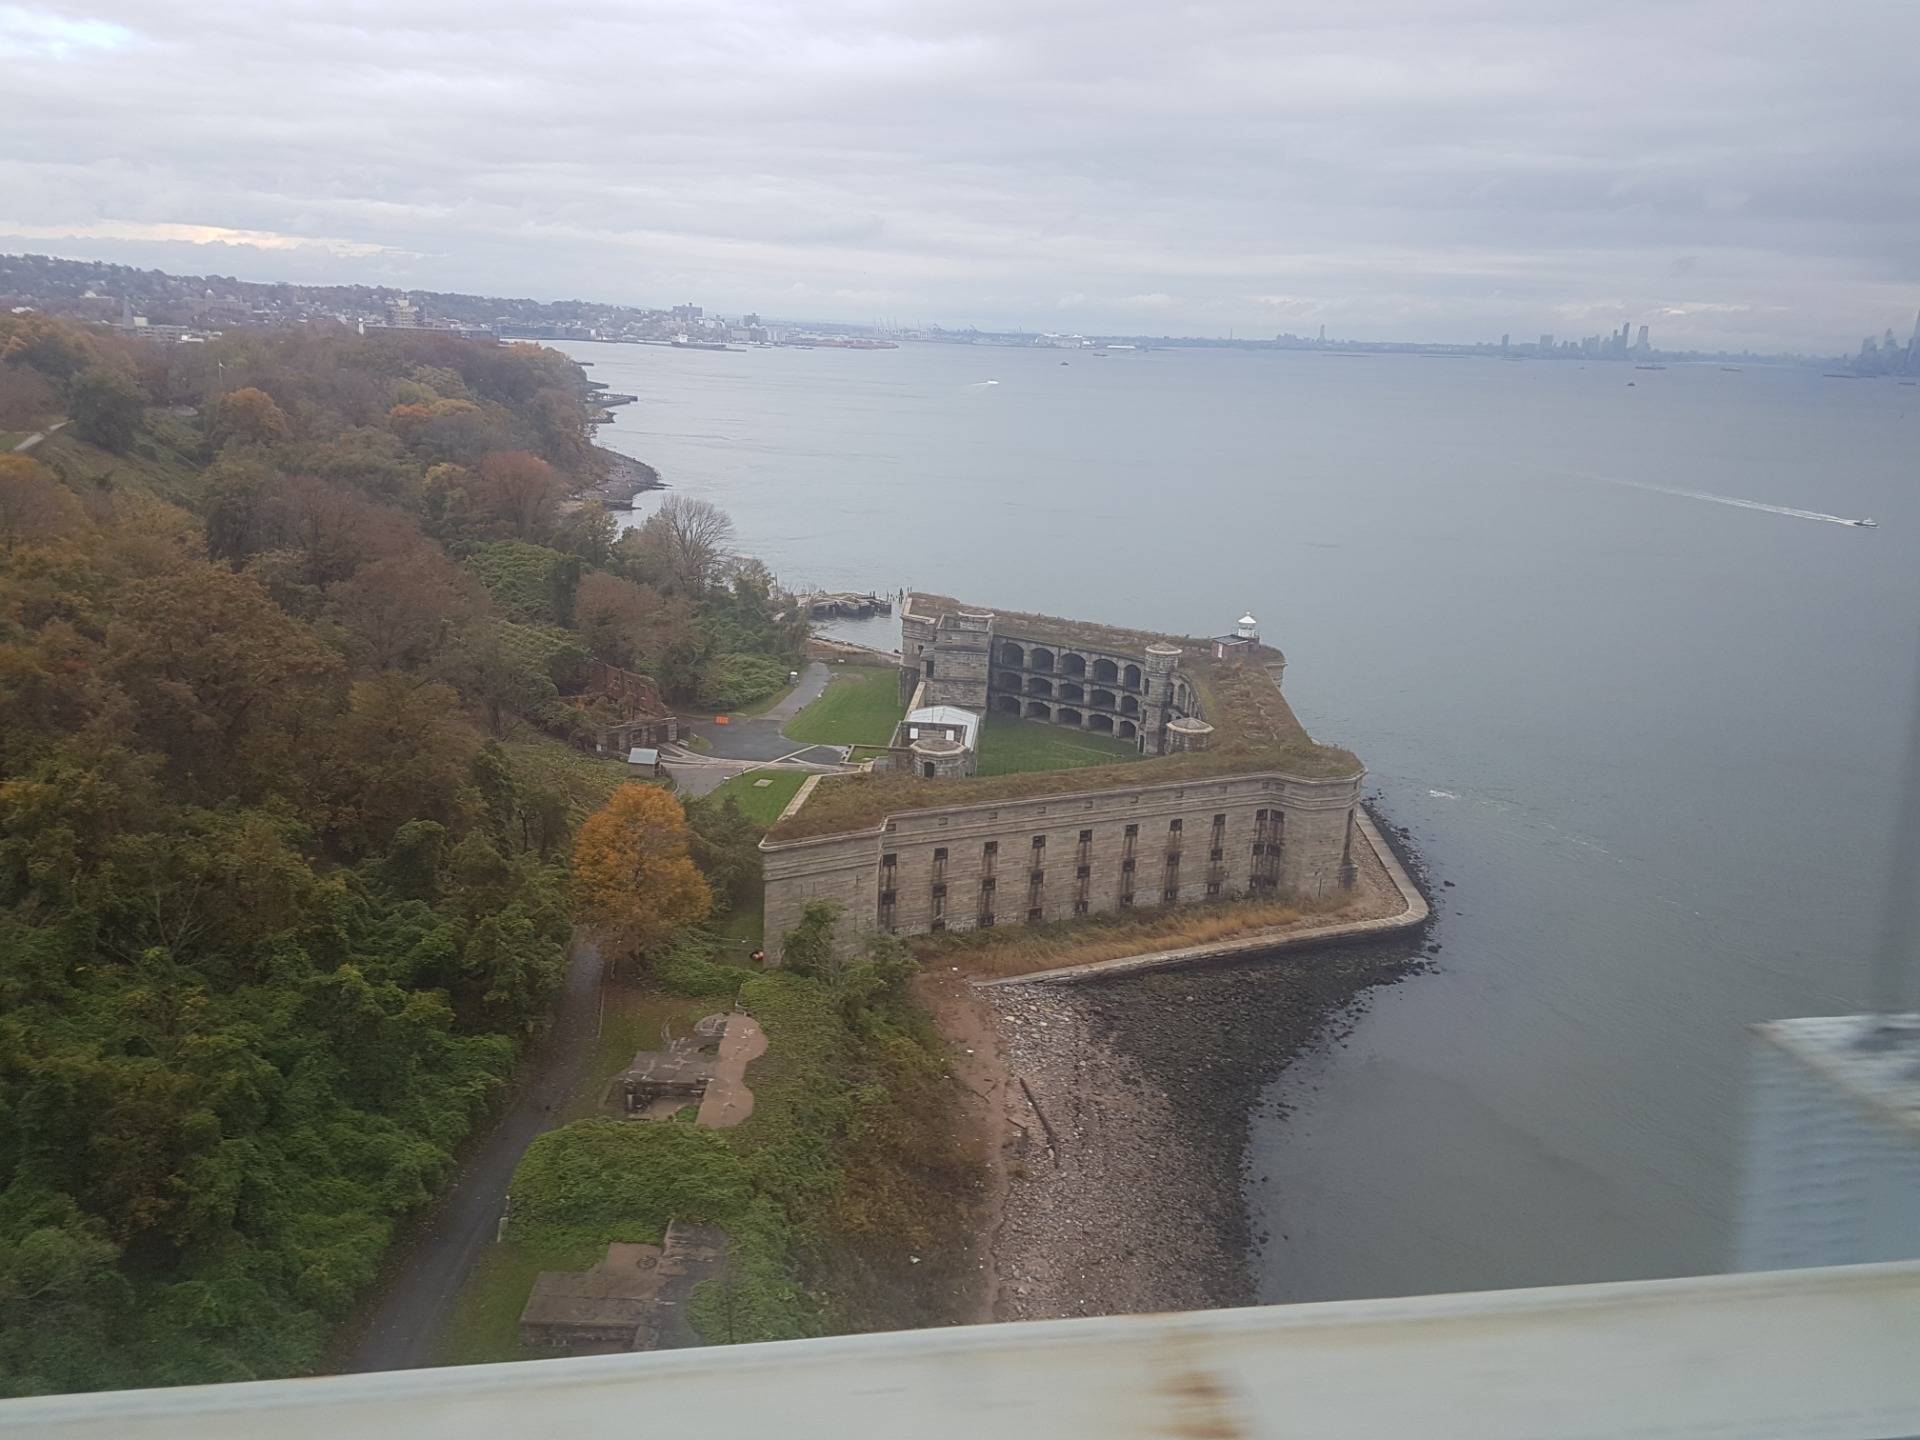 Bus trip down to the start line on Staten Island. This is Fort Wadsworth.